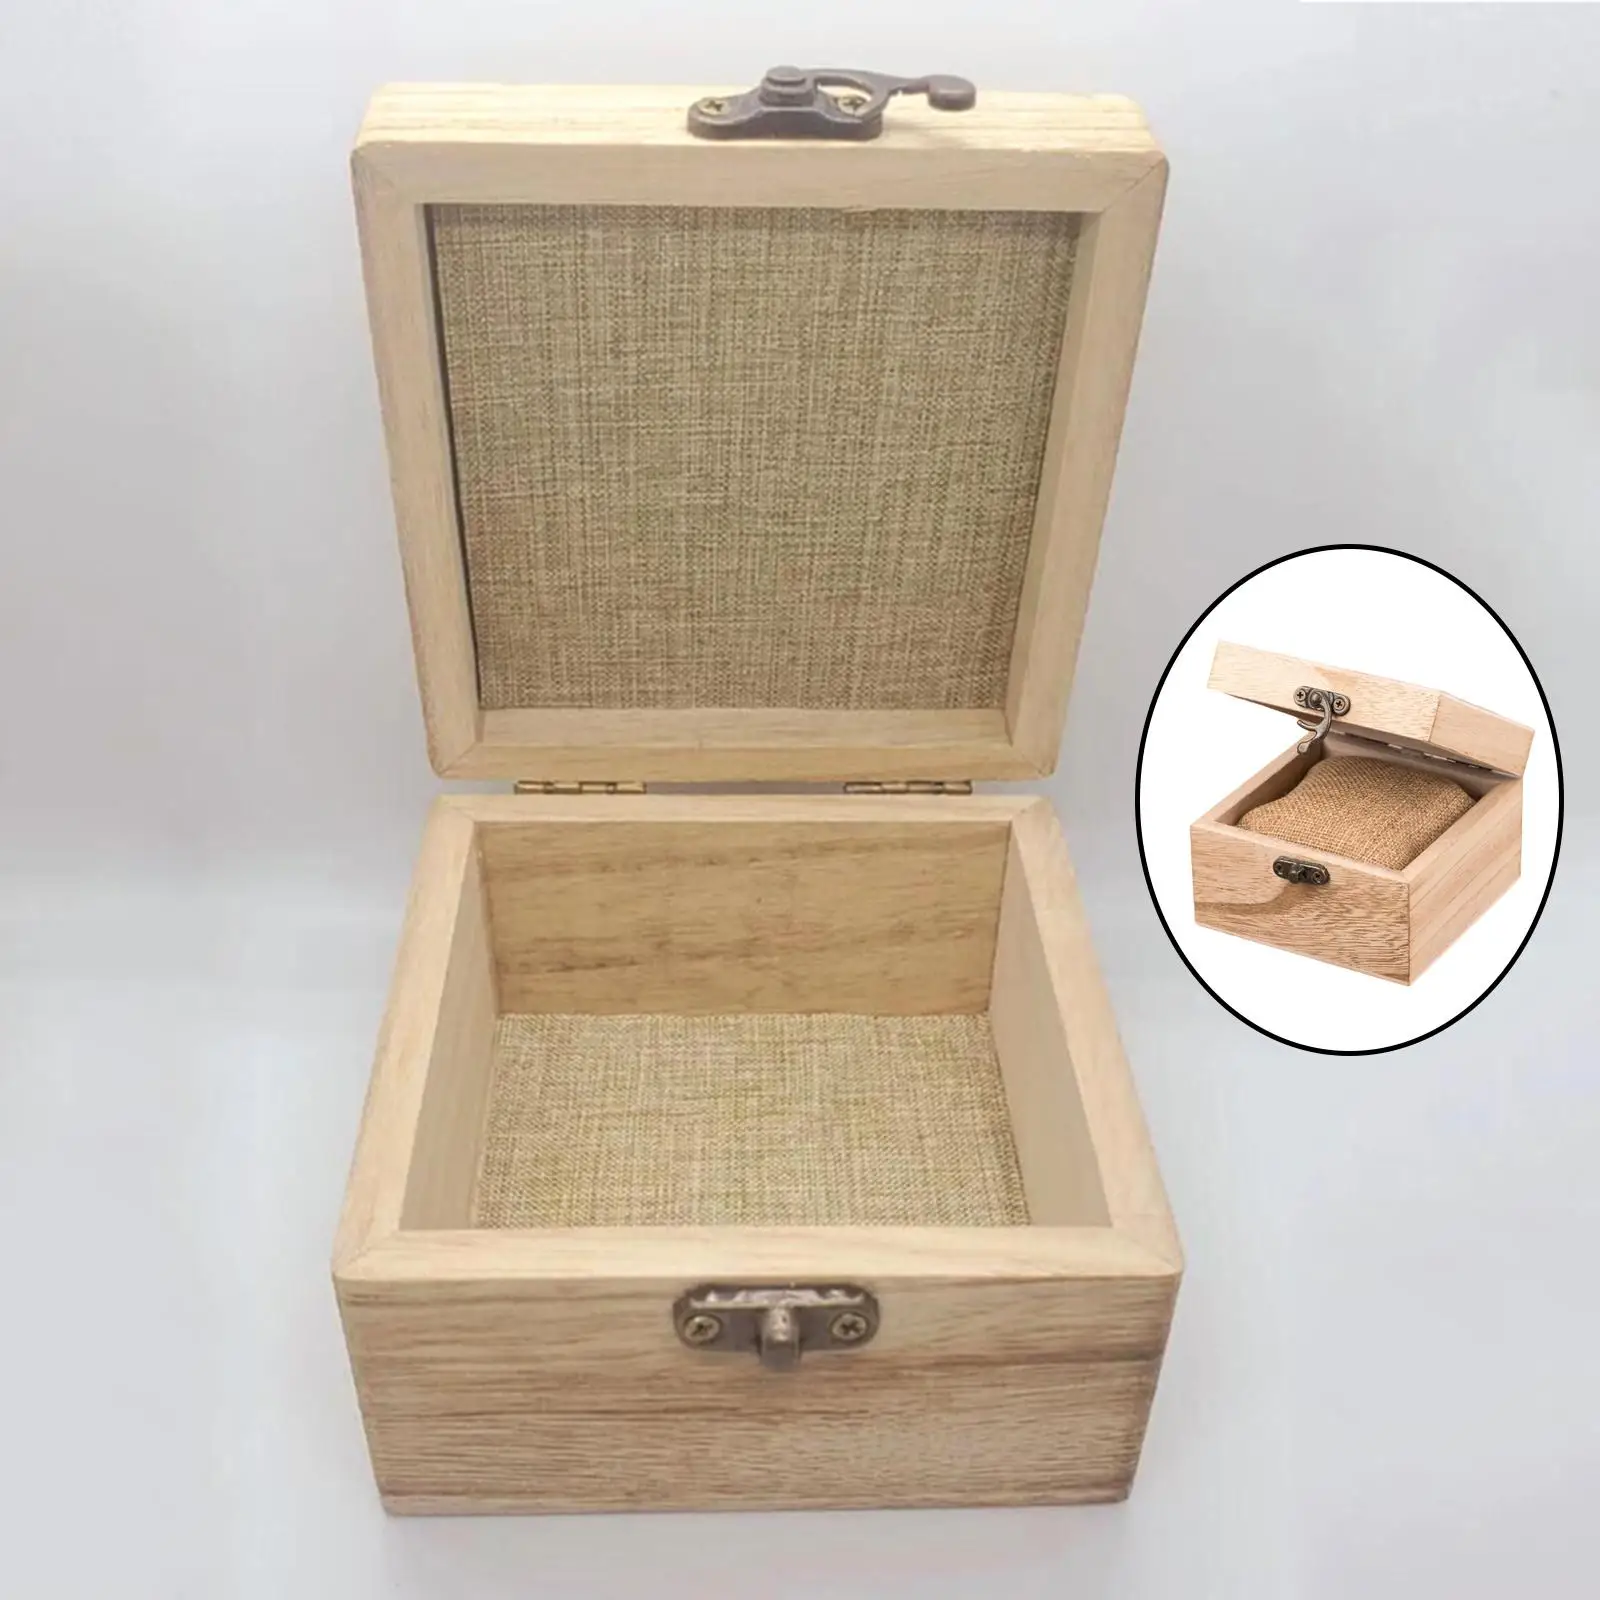 Unpainted Case Classic Jewelry Display Box Chest for Gadgets